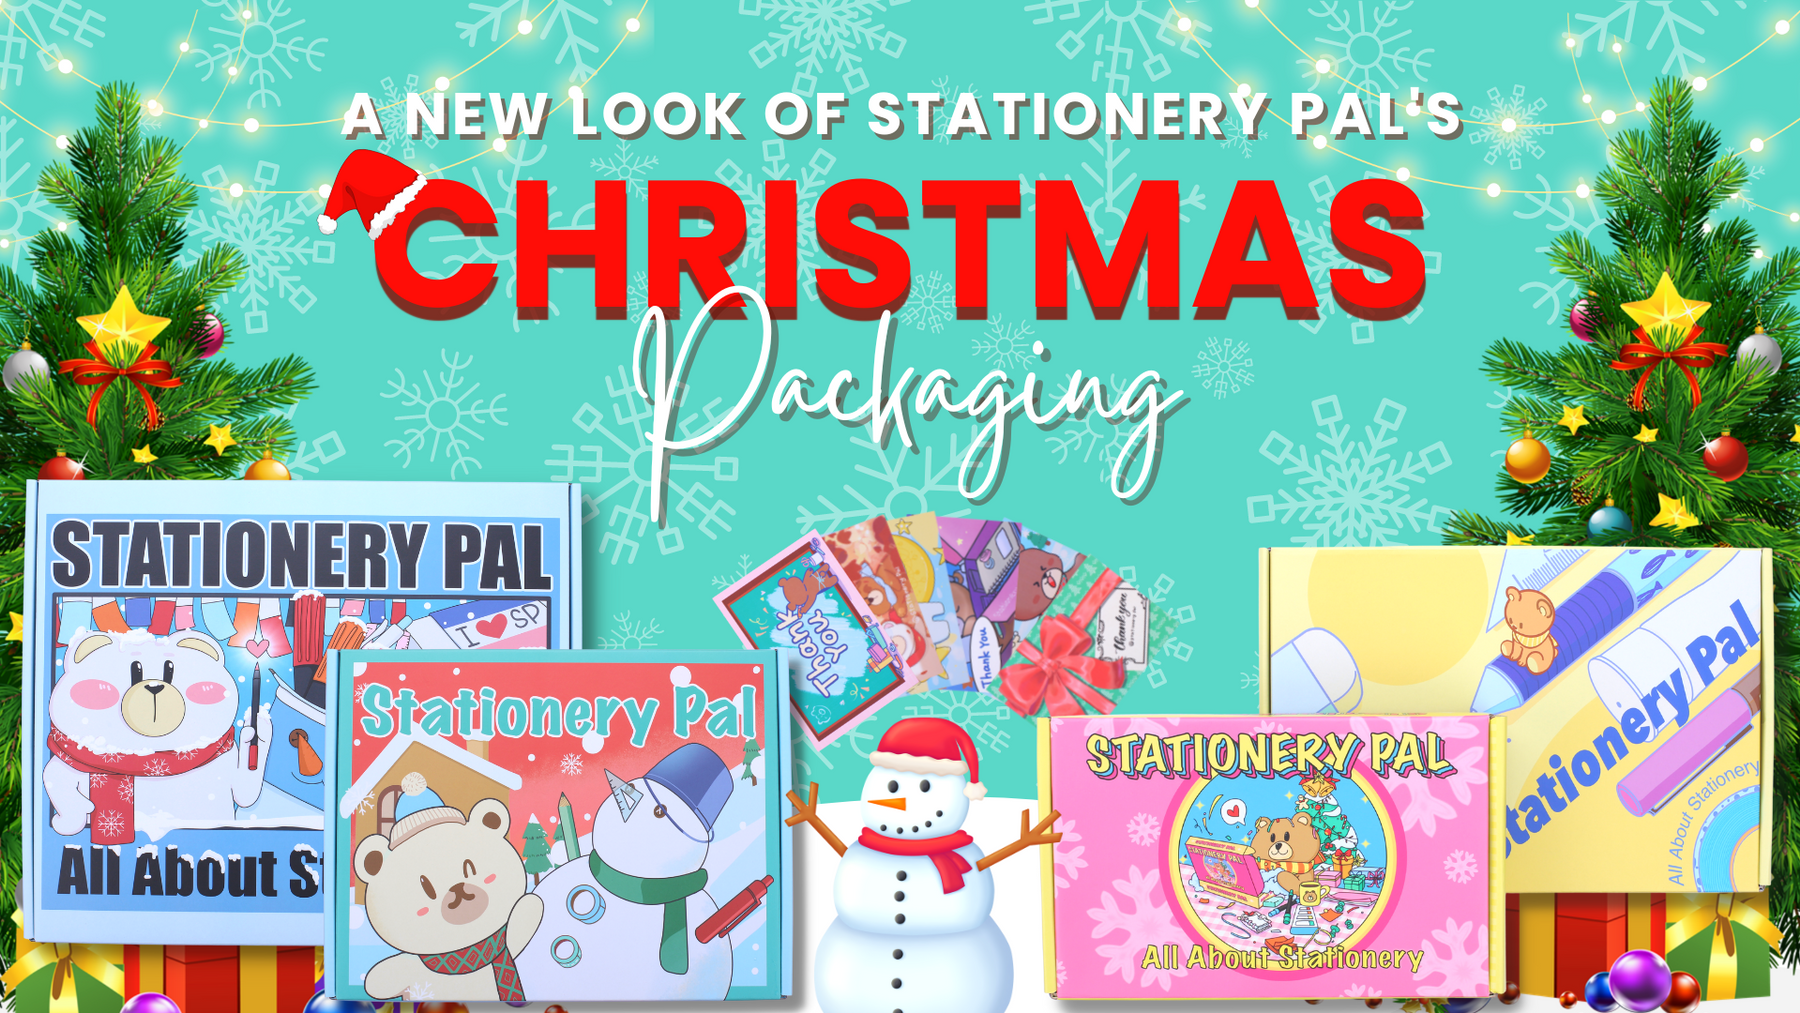 The New Packaging of Stationery Pal